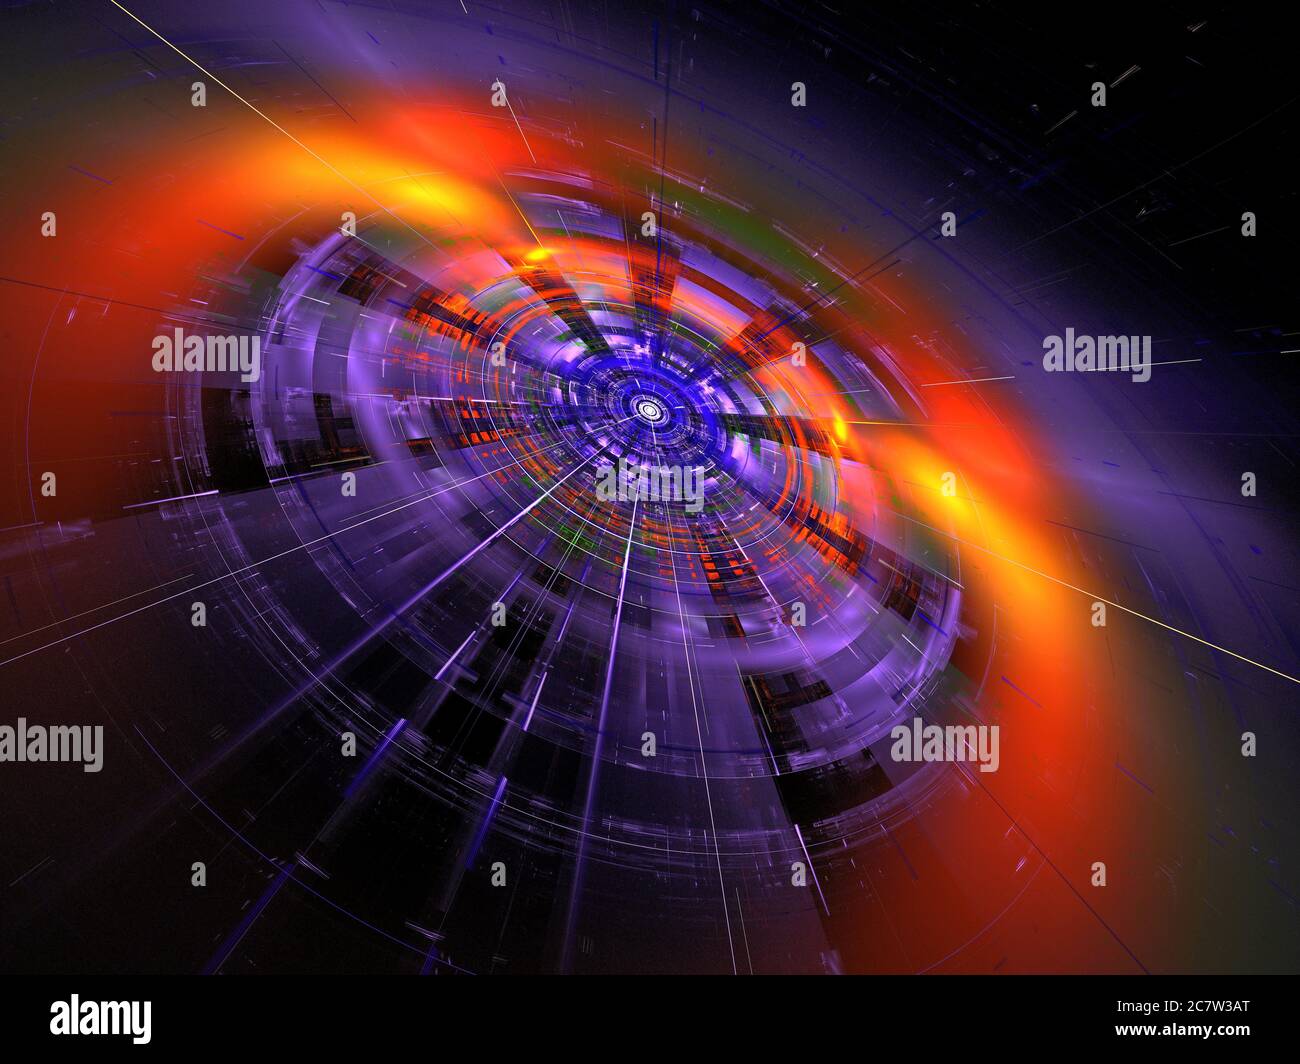 Science Fiction Space Craft - Flame Fractal Art Stock Photo